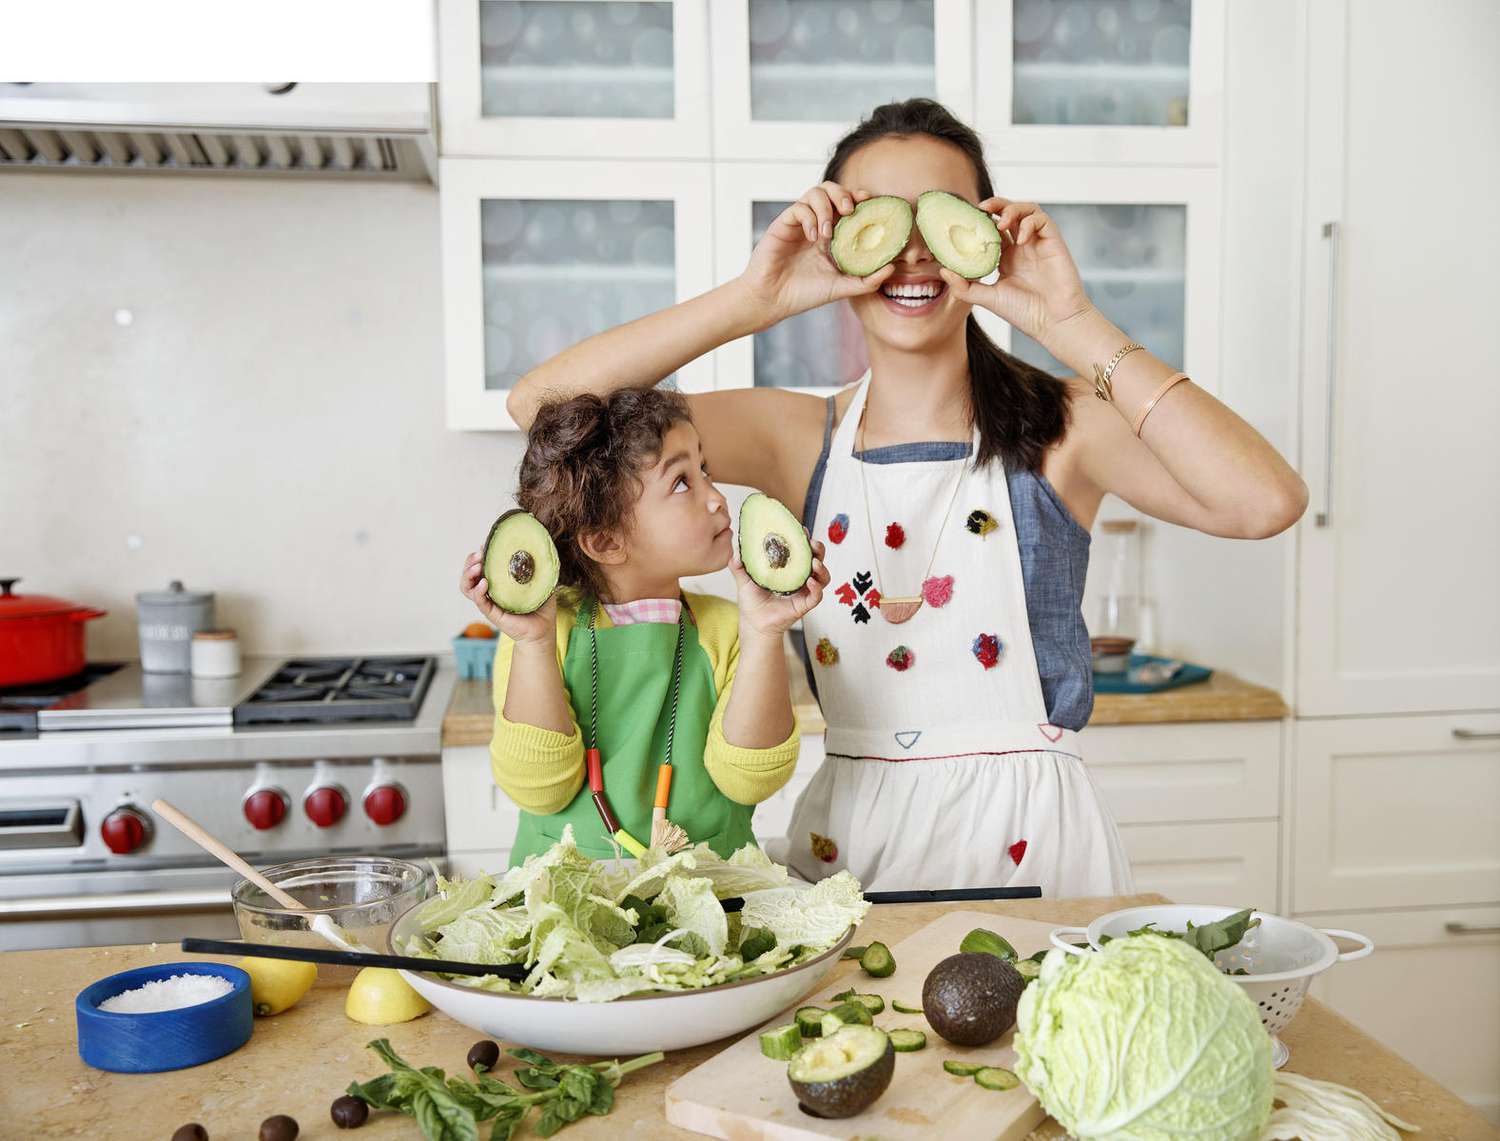 22 Ways to Make Cooking With Kids More Fun | Parents